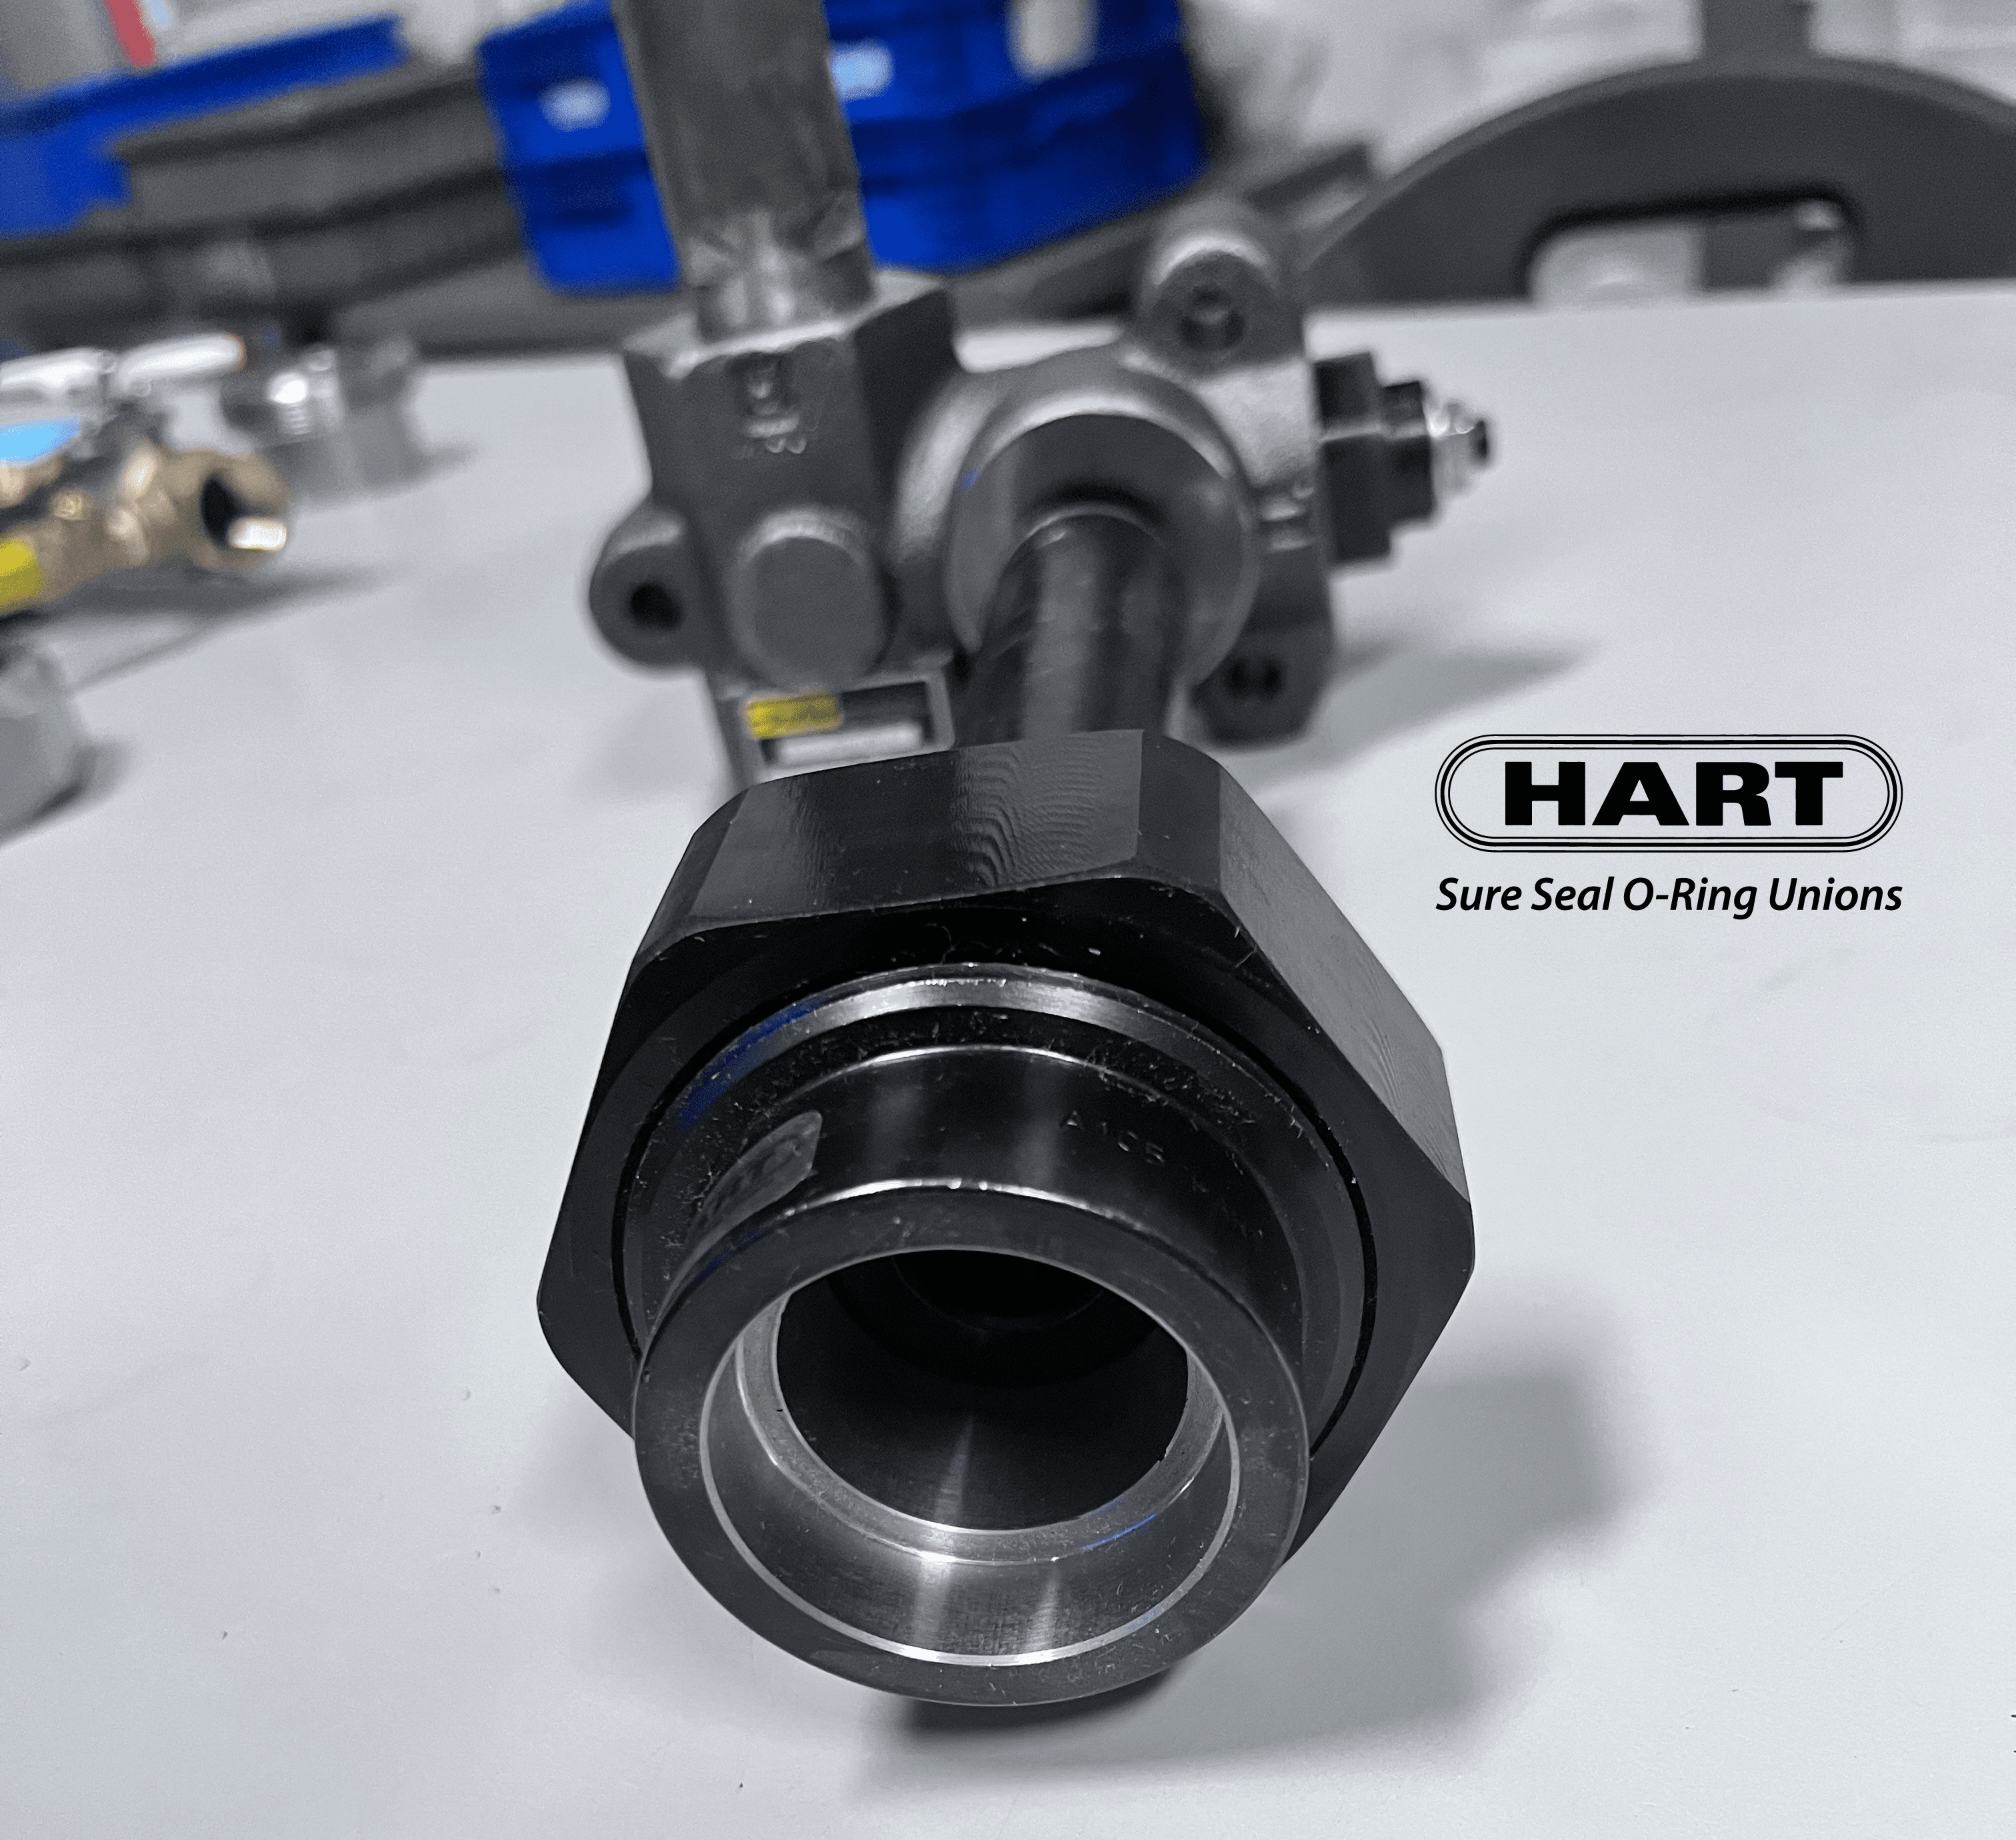 HART Carbon Steel Socketweld Unions connected to a valve.